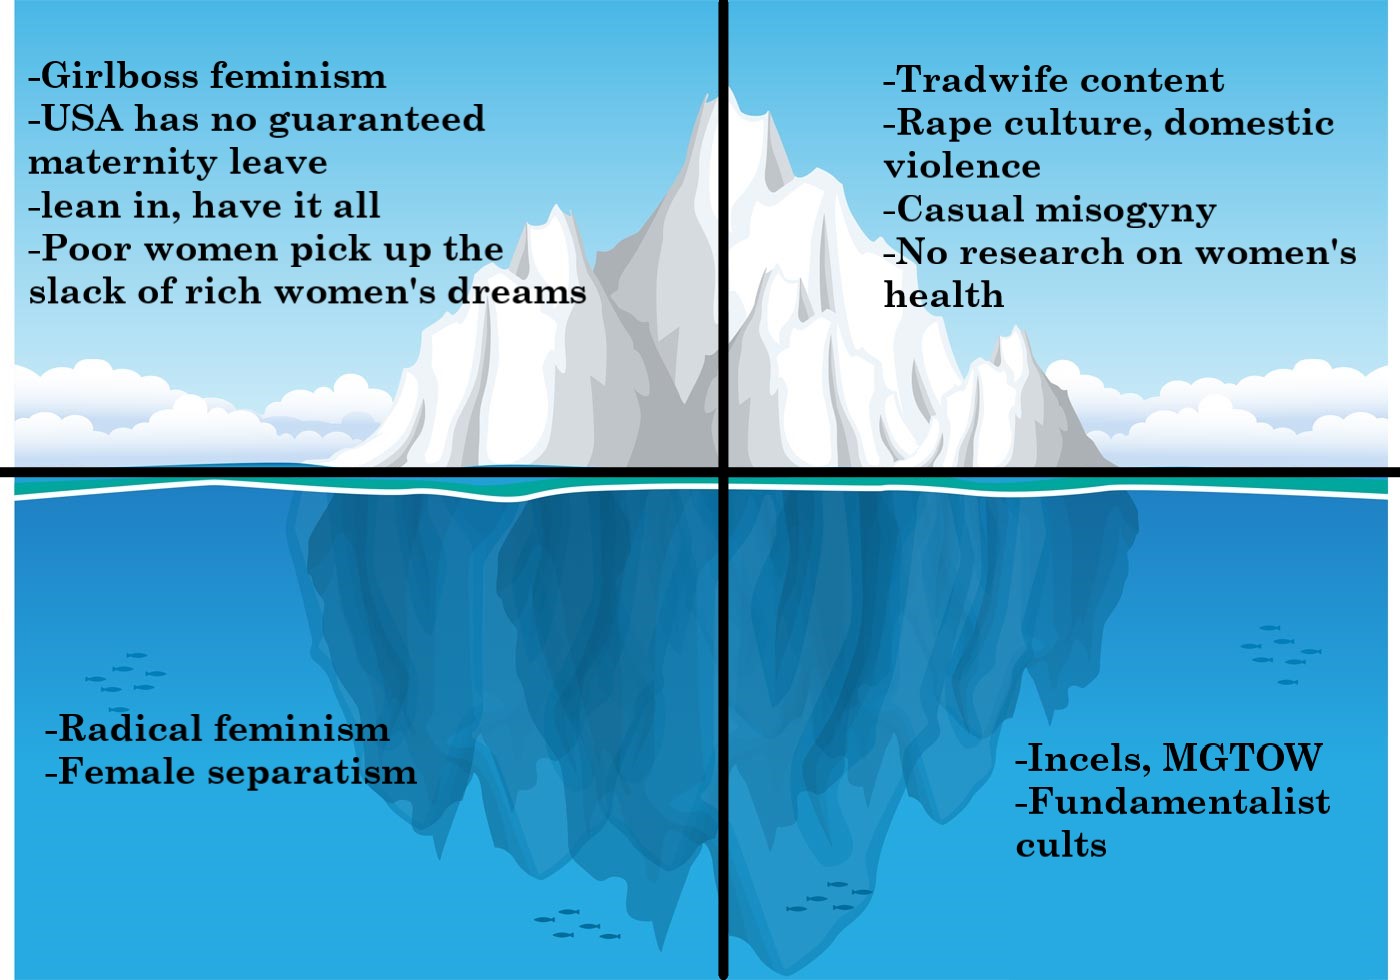 A clipart image of an iceberg half submerged in water that has been split into 4 quadrants. The top row is the top of the iceberg, and the bottom row is underwater. The quadrants read as follows: Top left: Girlboss feminism; USA has no guaranteed maternity leave; lean in, have it all; Poor women pic up the slack of rich women's dreams. Top right: tradwife content; rape culture, domestic violence; casual misogyny; no research on women's health. Bottom left: radical feminism; female separatism. Bottom right: Incels, MGTOW; fundamentalist cults.